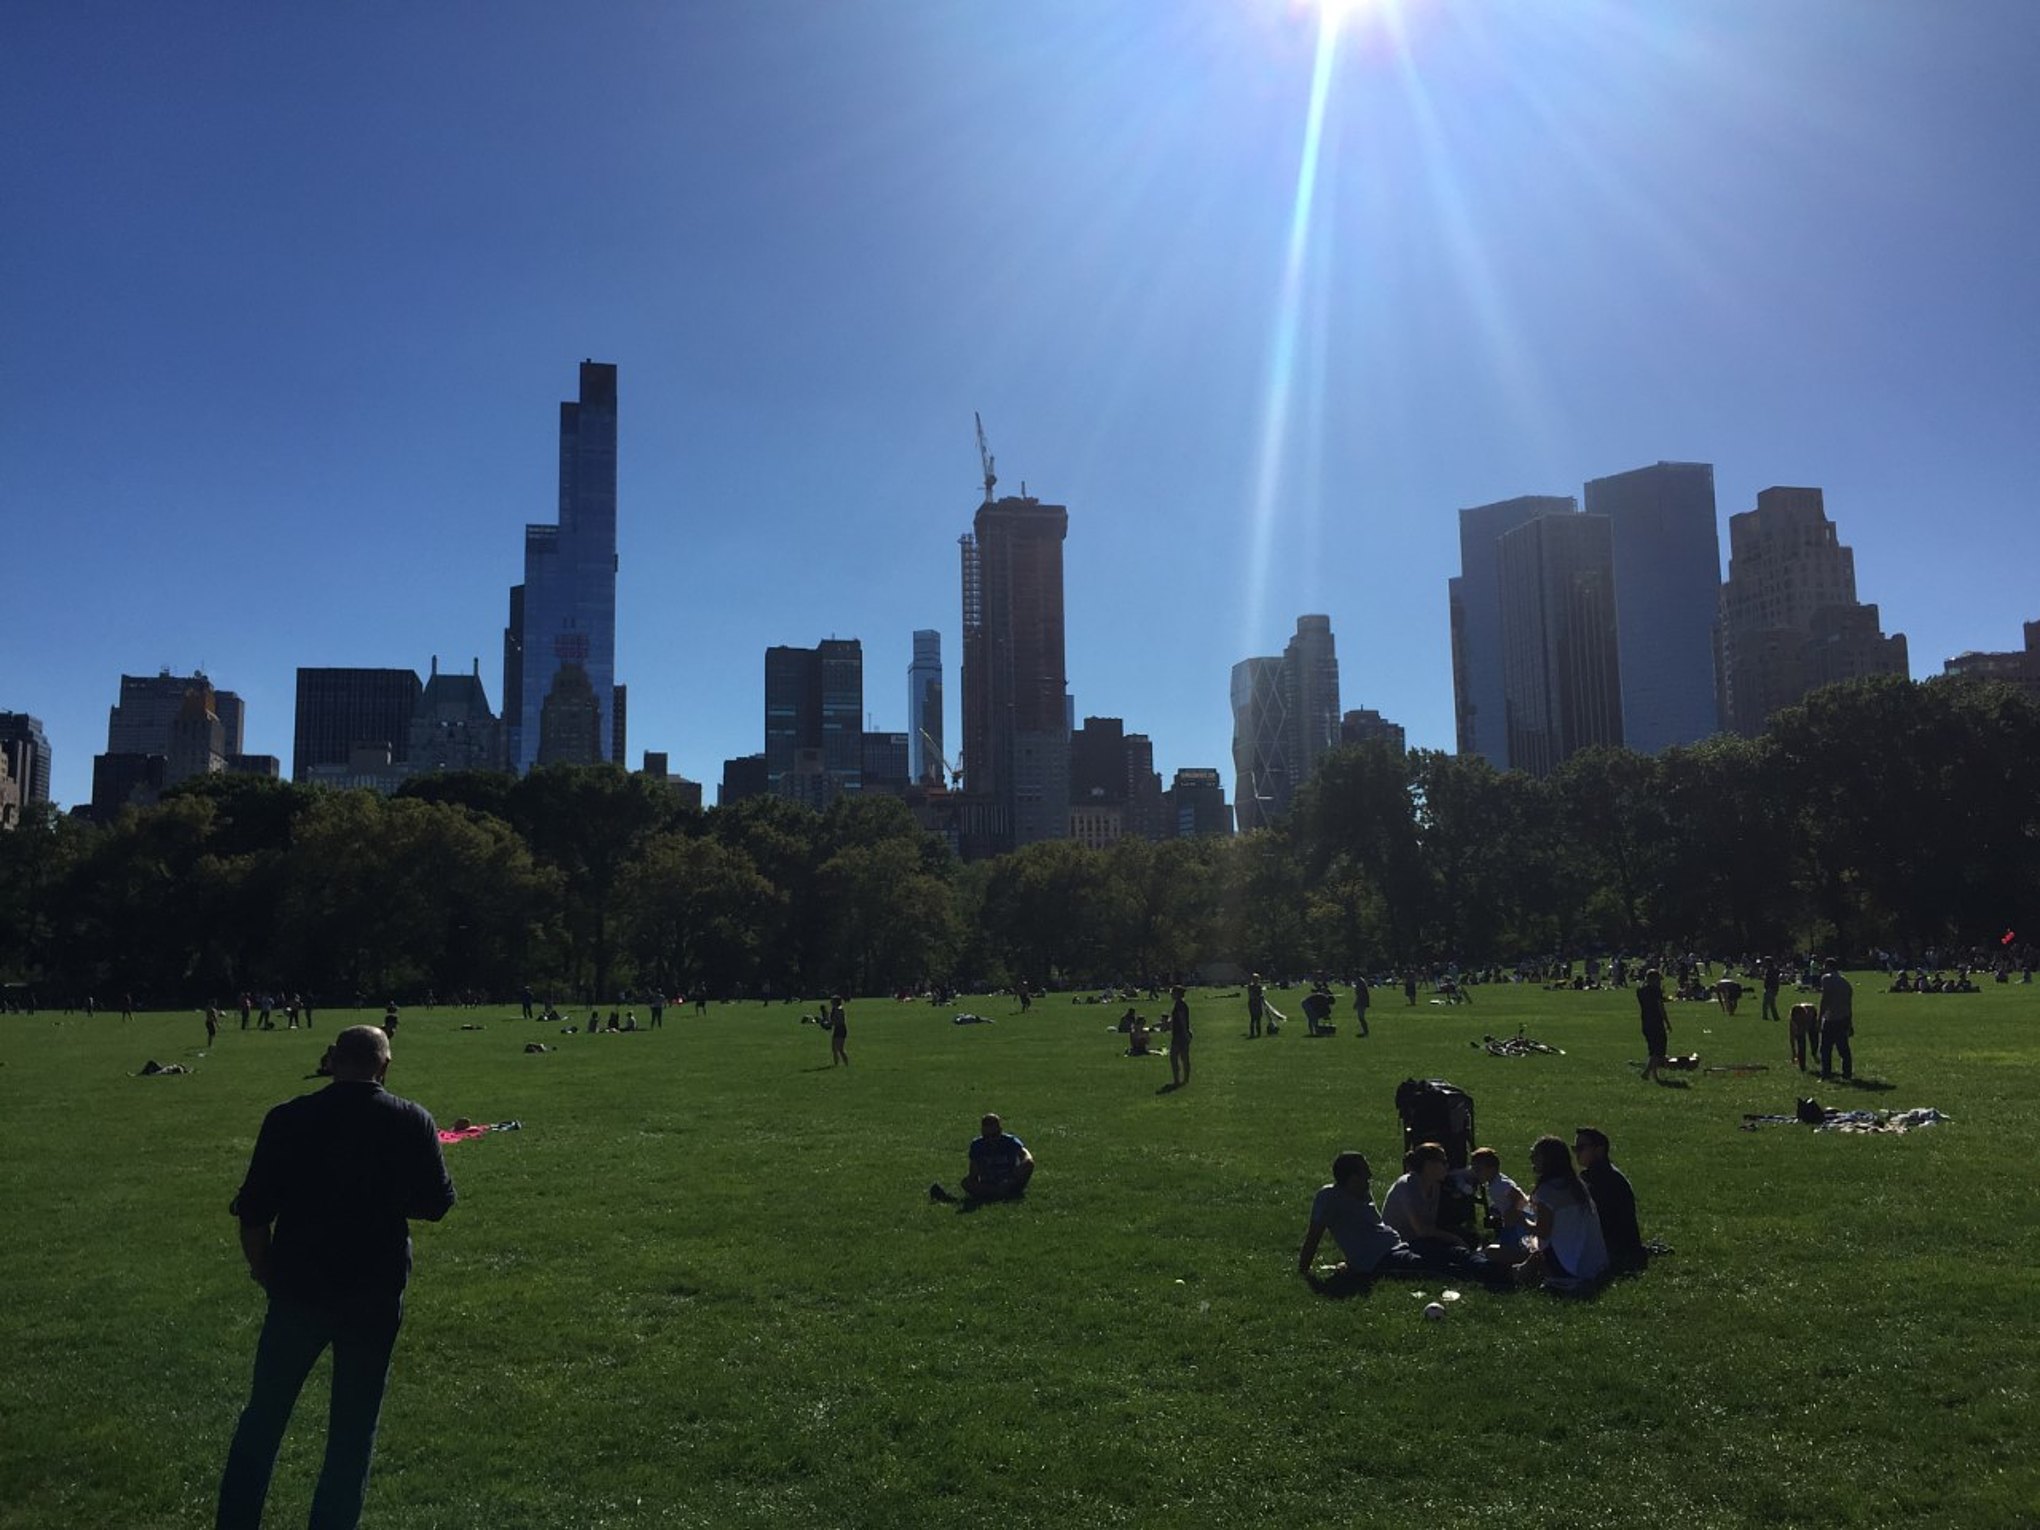 People gather at Central Park on a sunny day